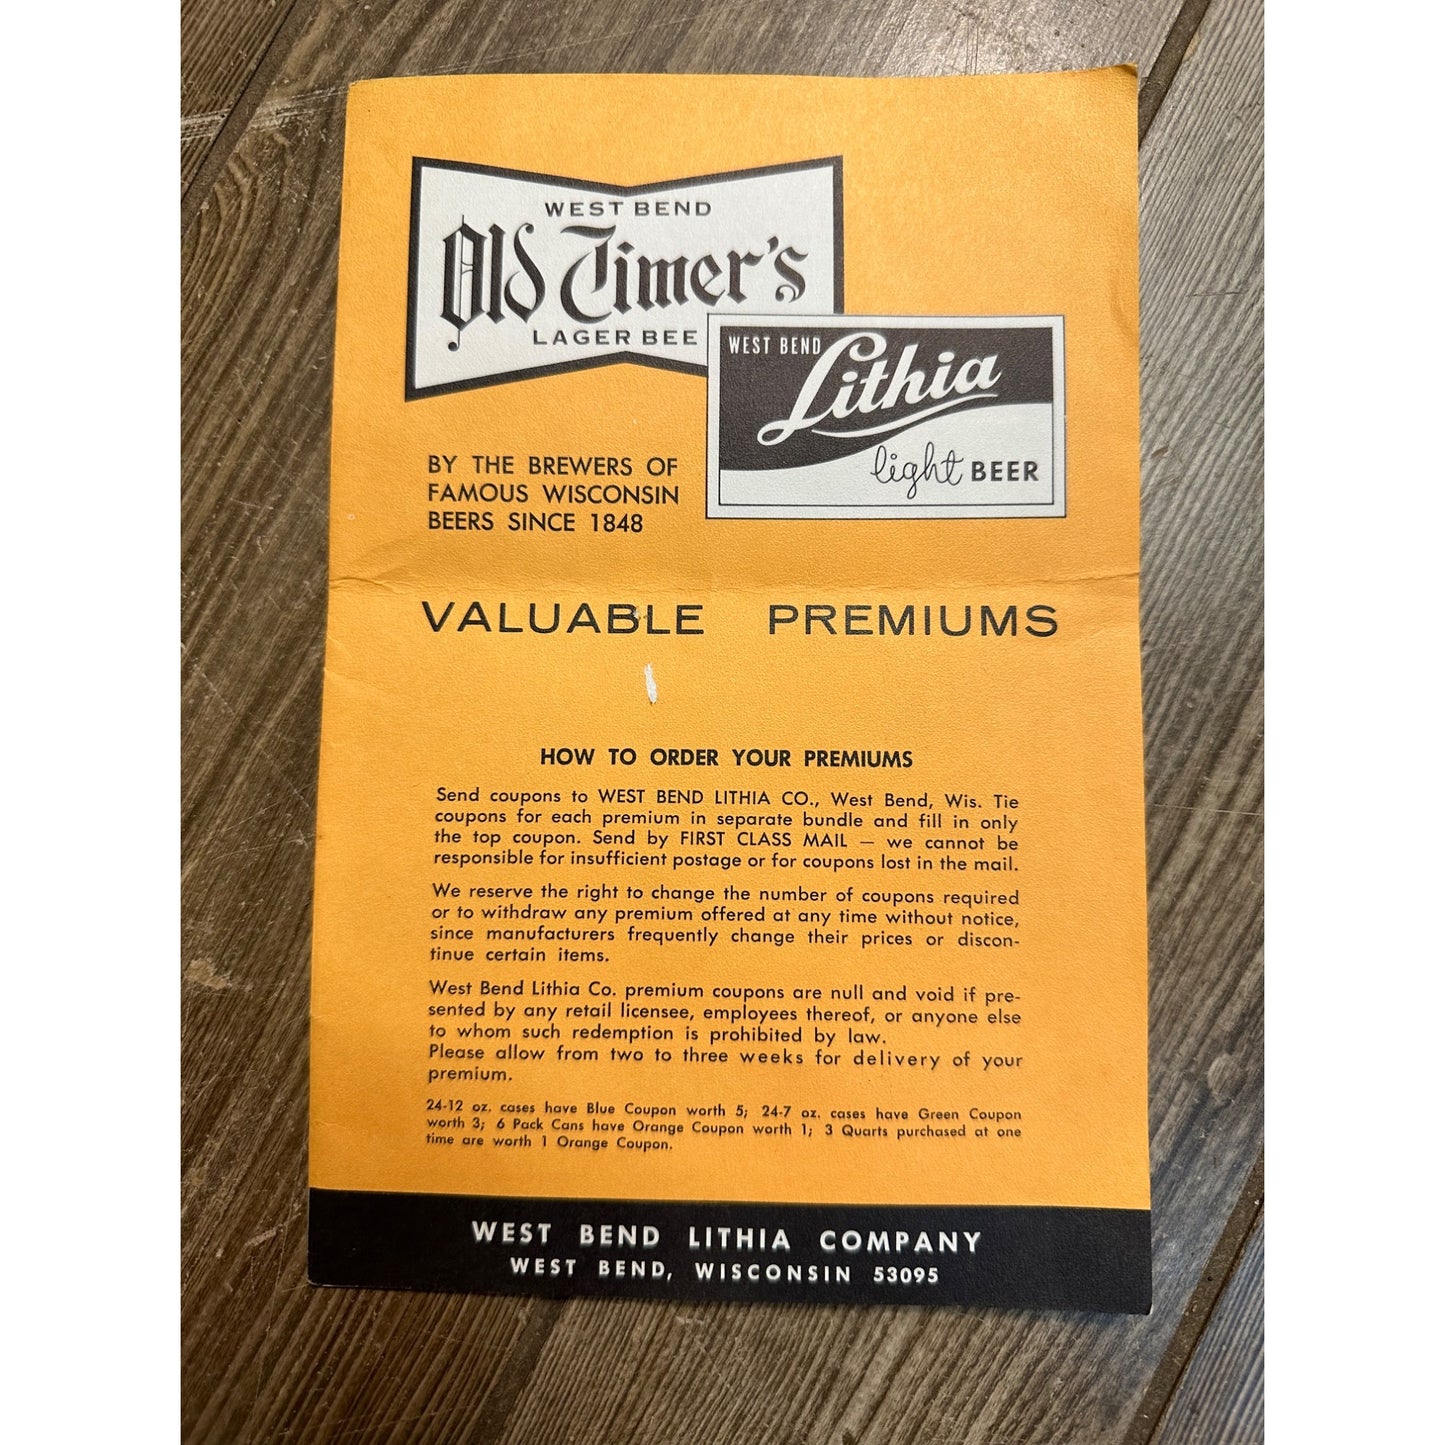 WEST BEND LITHIA BREWING COMPANY VALUABLE PREMIUMS ADVERTISING BOOKLET